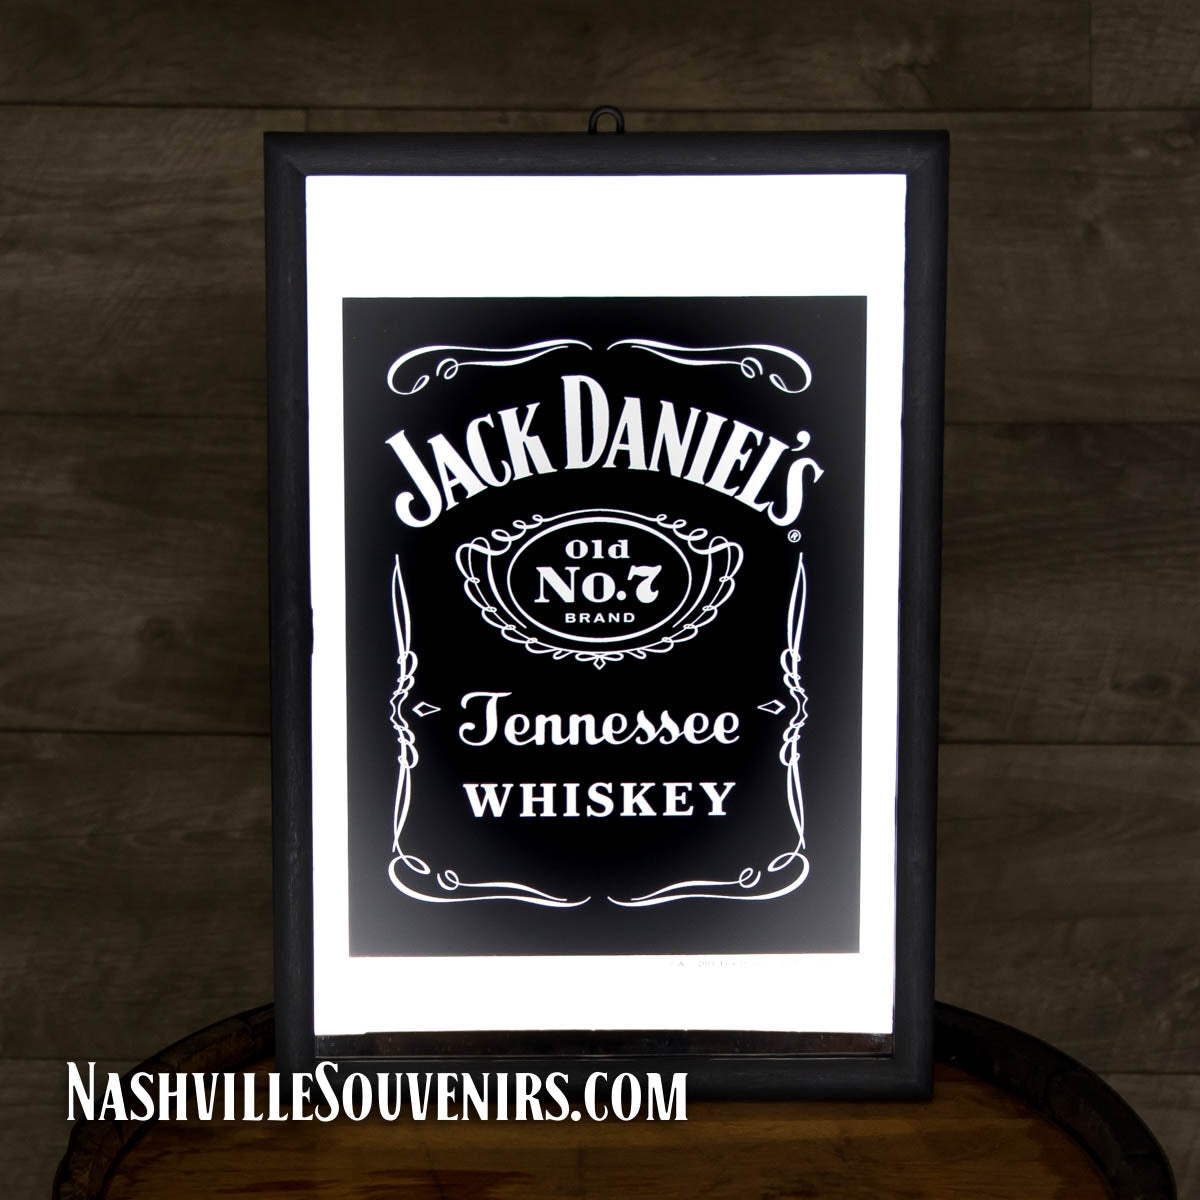 Officially licensed Jack Daniels Black Label Mirror. FREE SHIPPING on all US orders over $75!